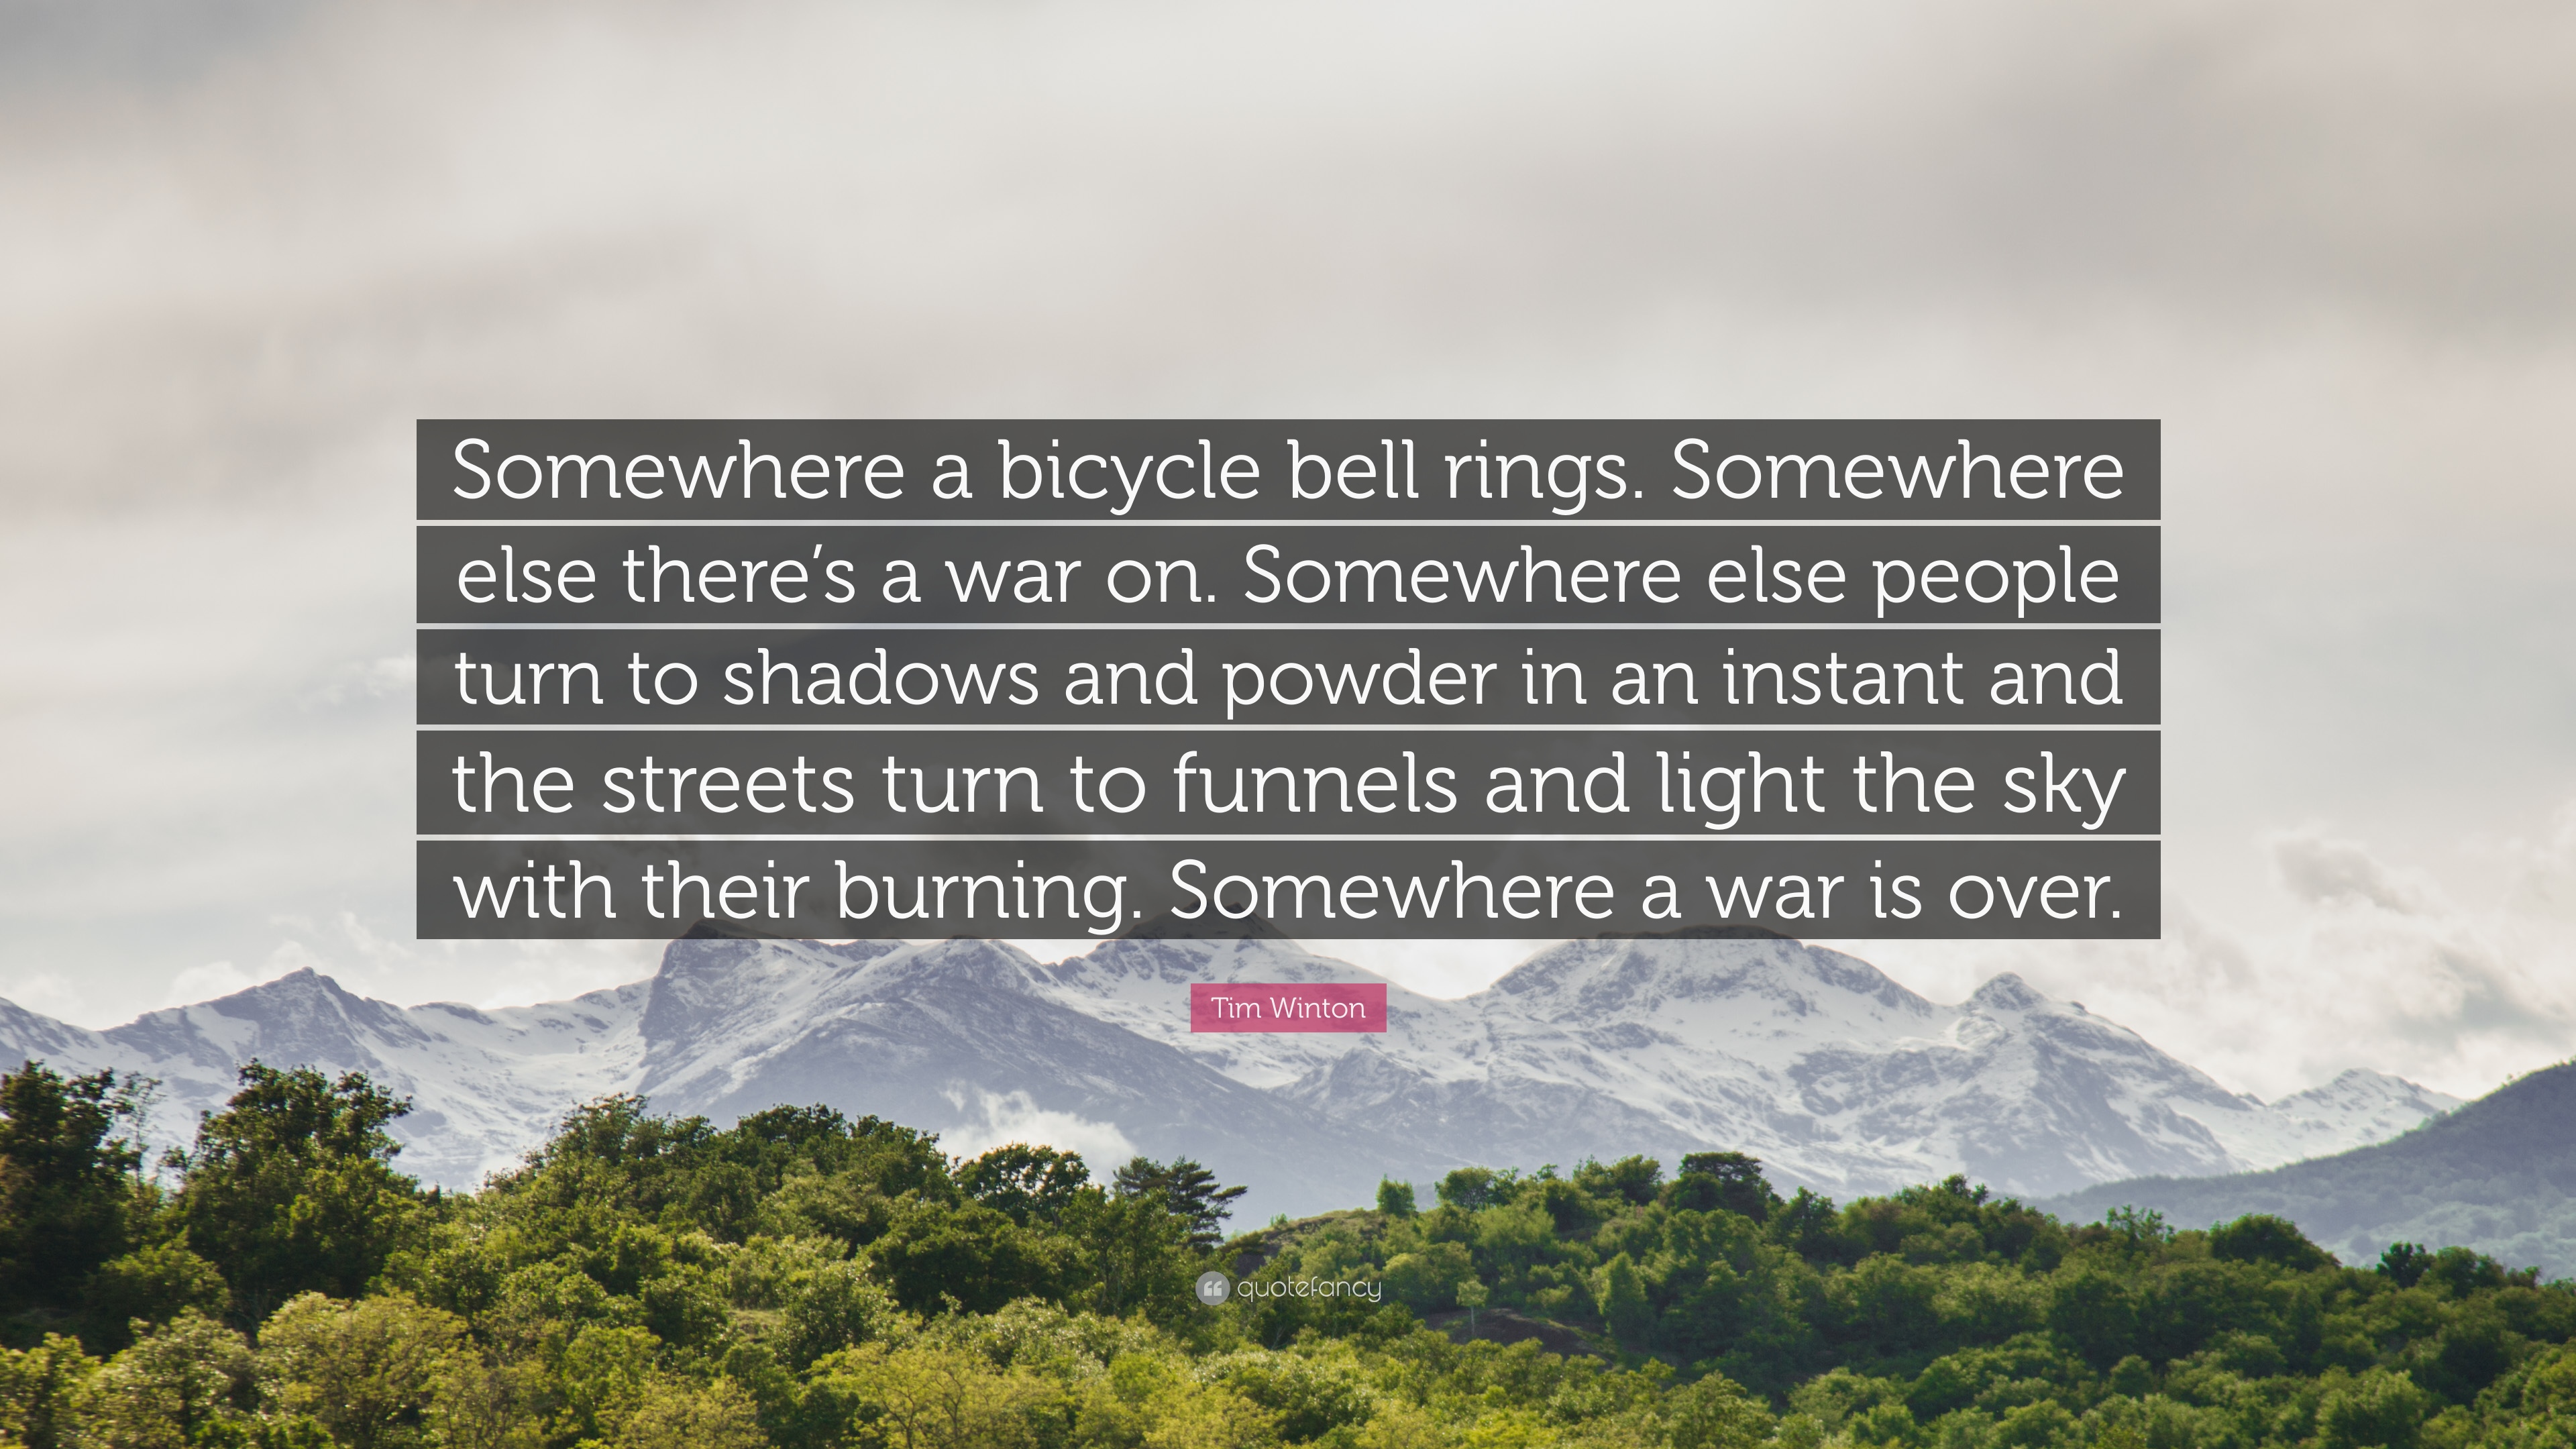 Tim Winton Quote: “Somewhere a bicycle bell rings. Somewhere else ...